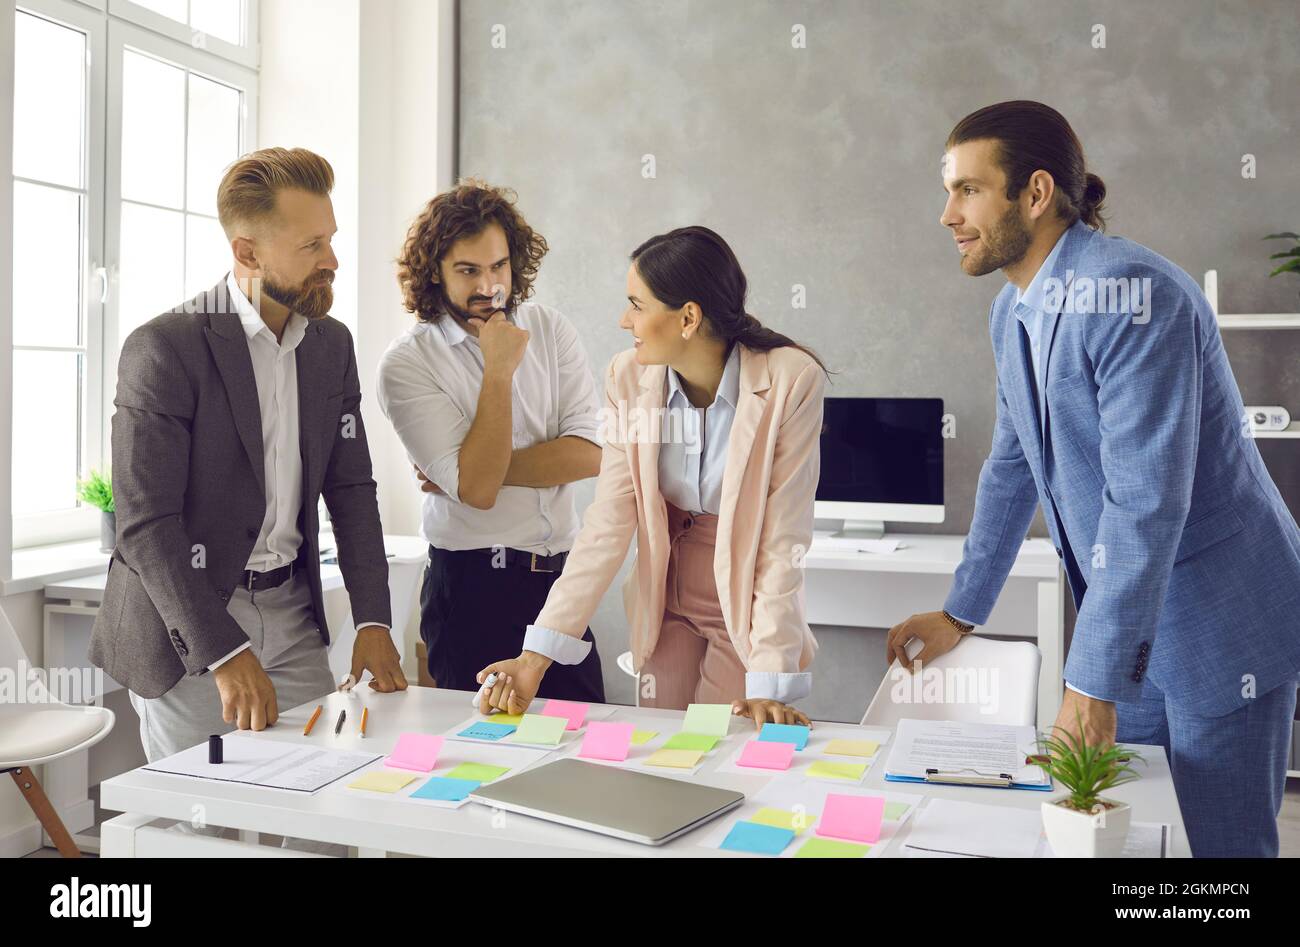 Team of creative business people brainstorming and discussing ideas in work meeting Stock Photo